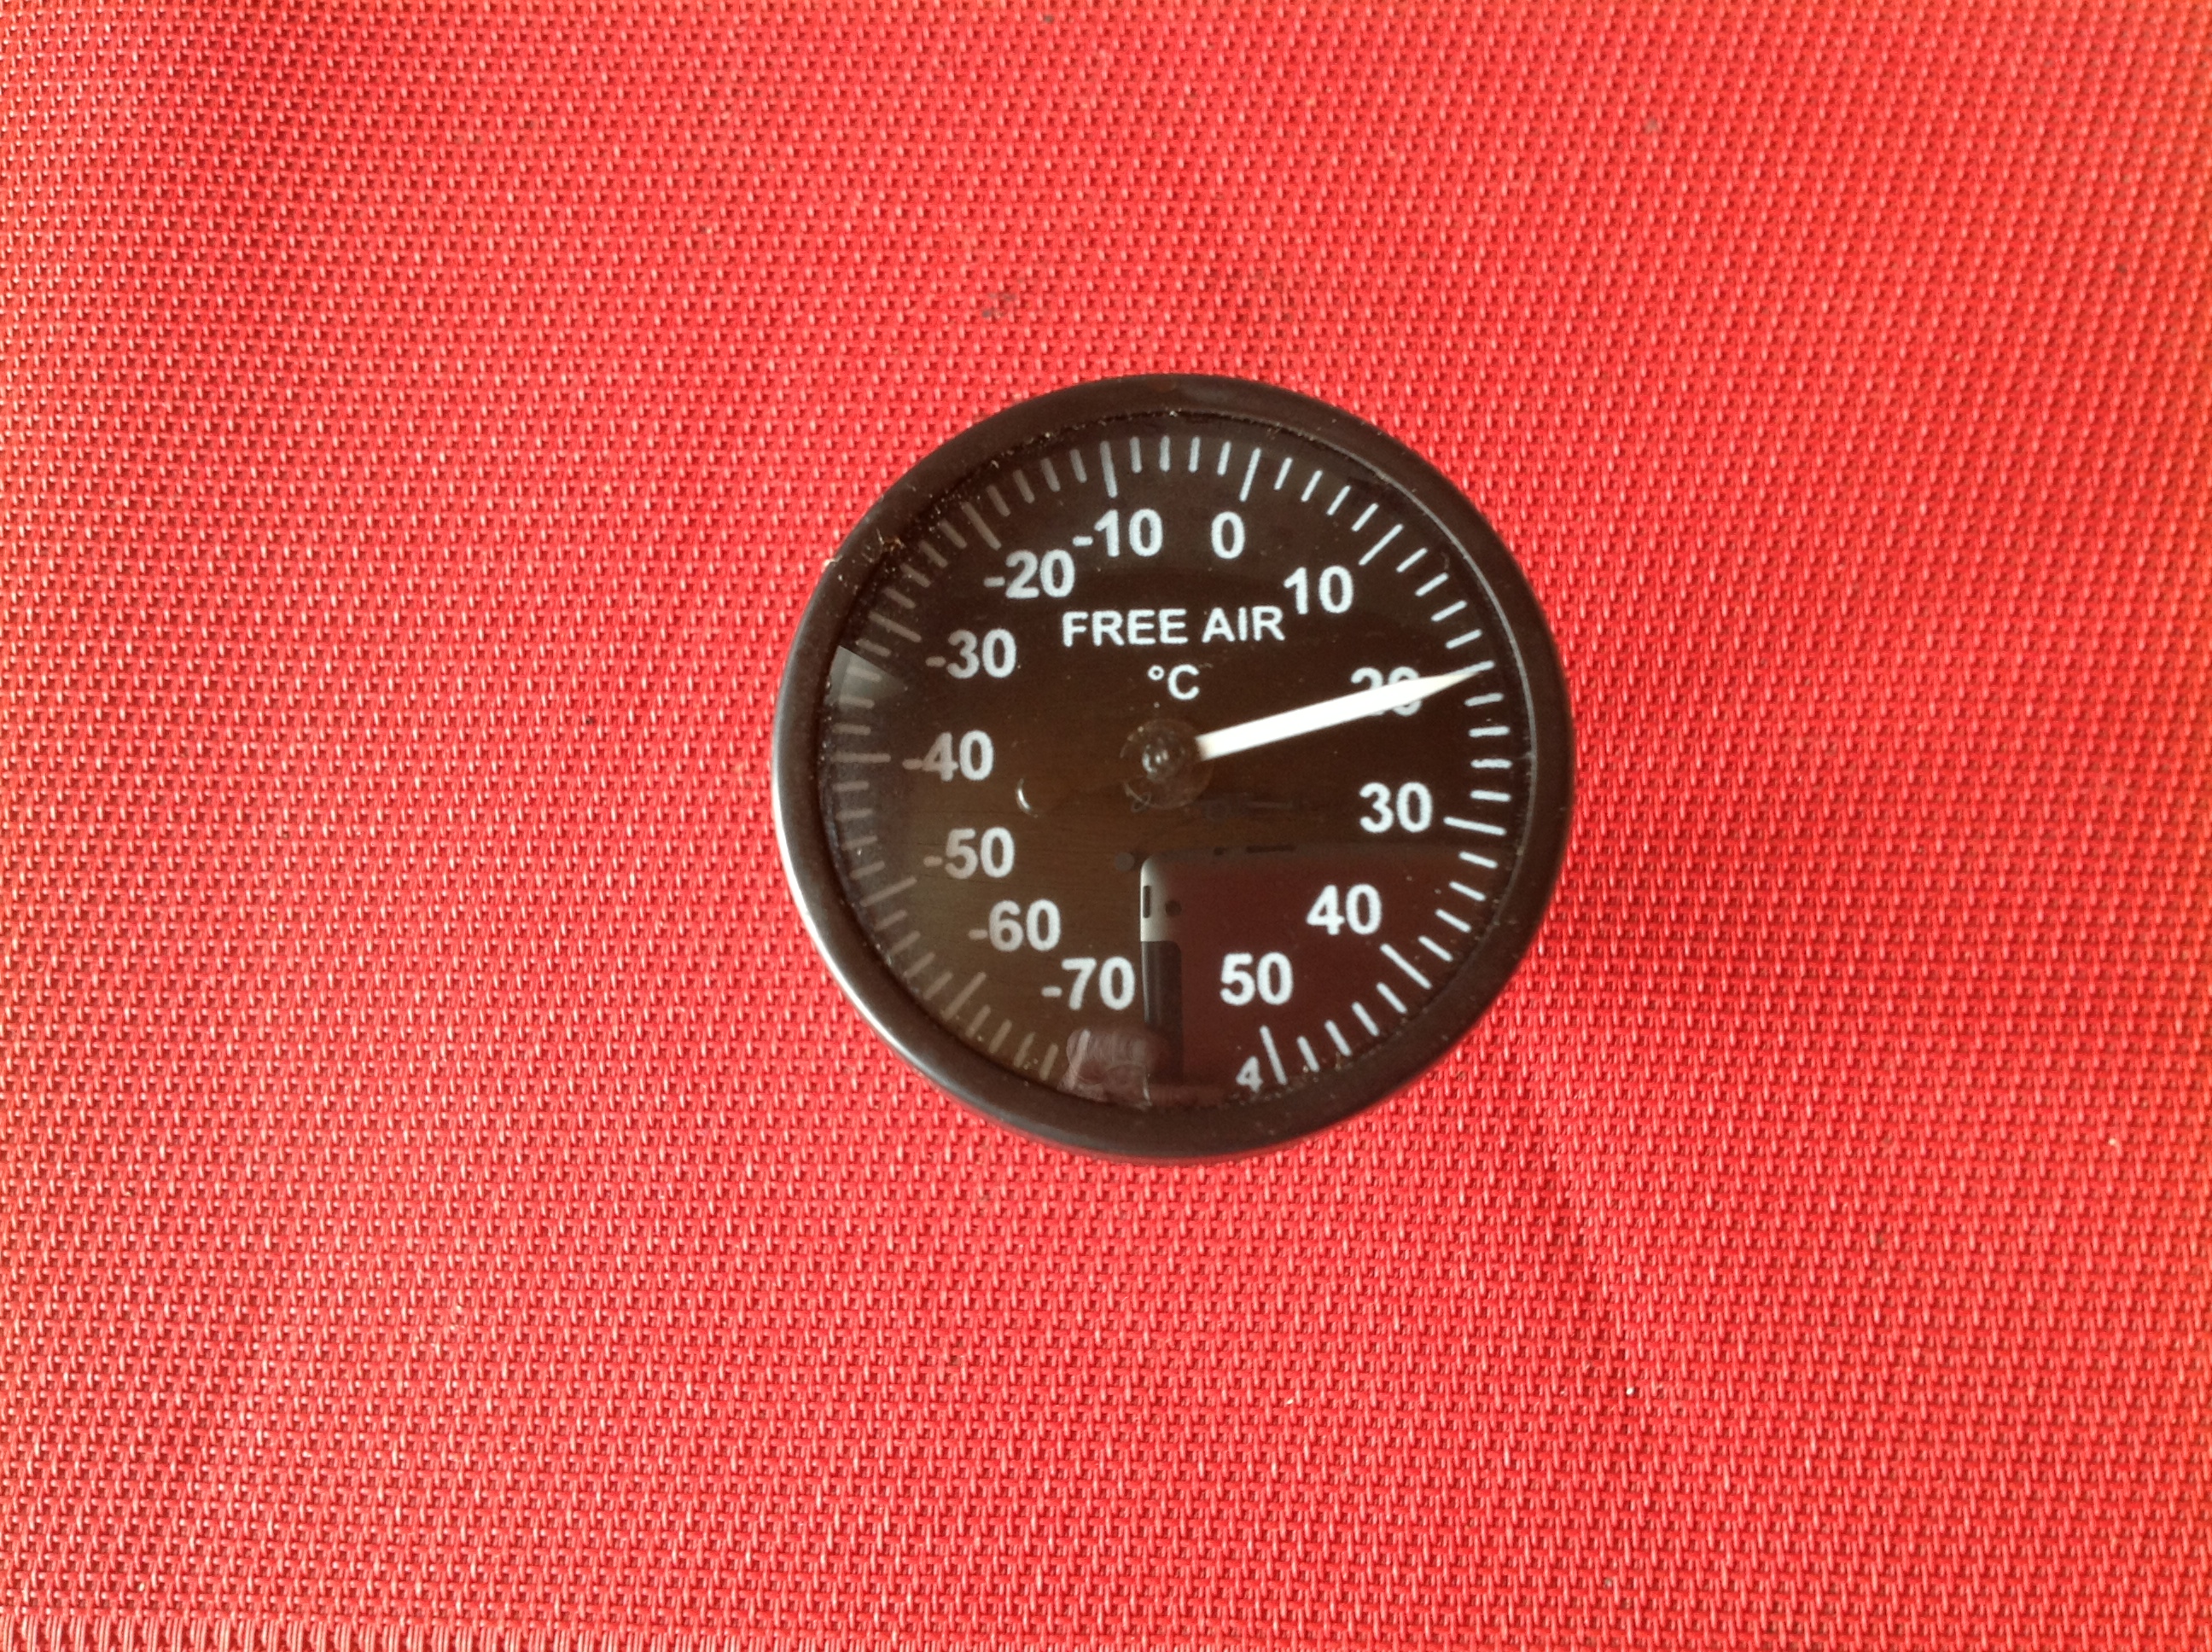 Thermometer, Bimetall MS-28028-2, Free Air, Hubschrauber, Bell UH-1